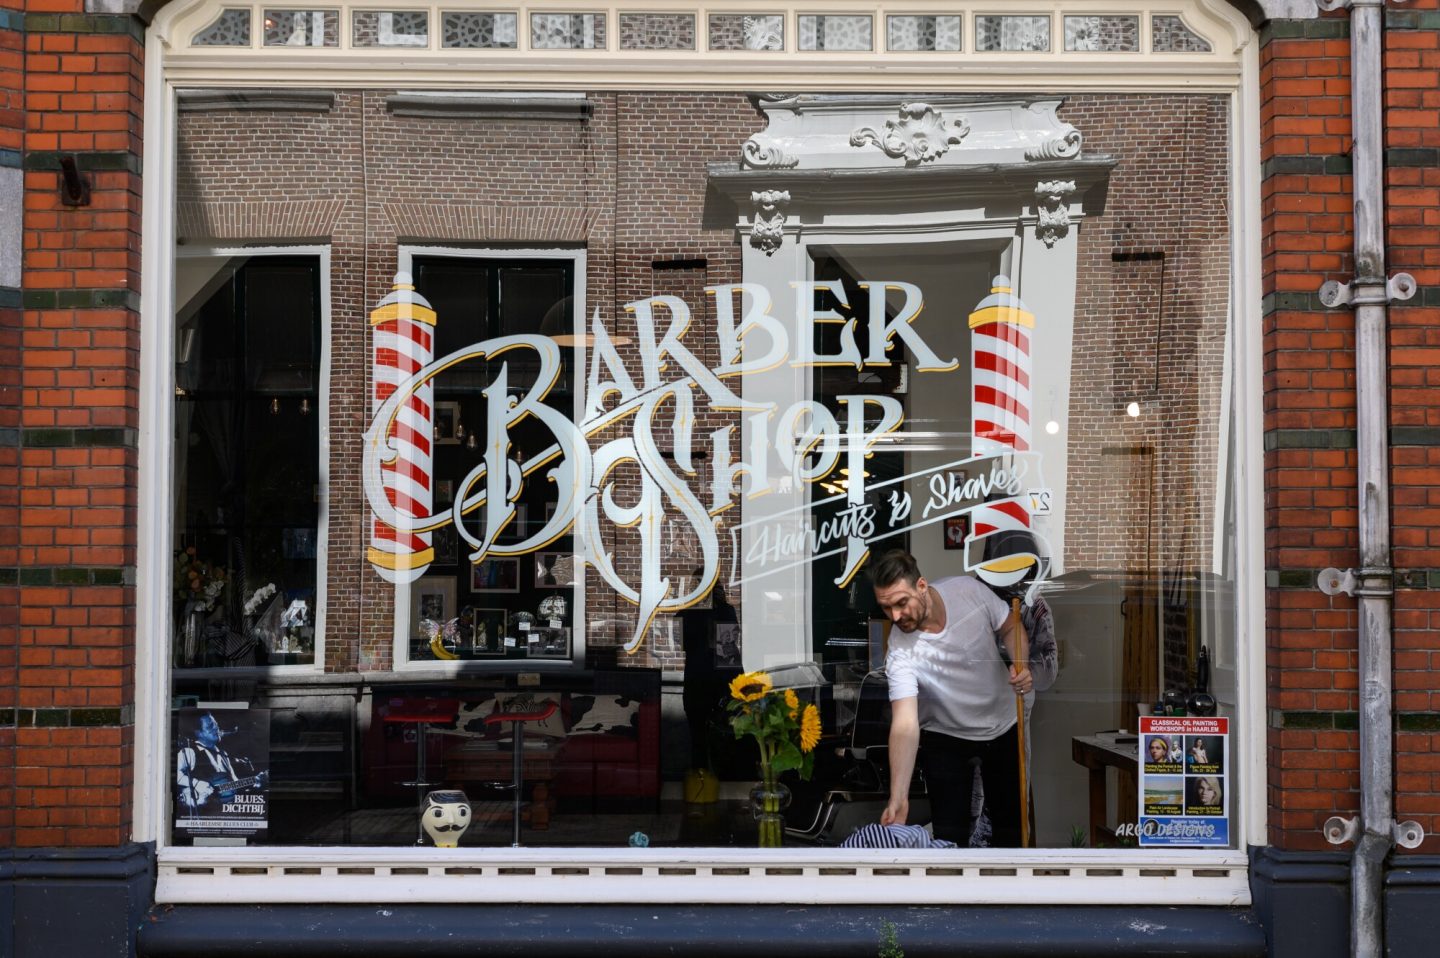 Is a Career as a Barber Right For Me?